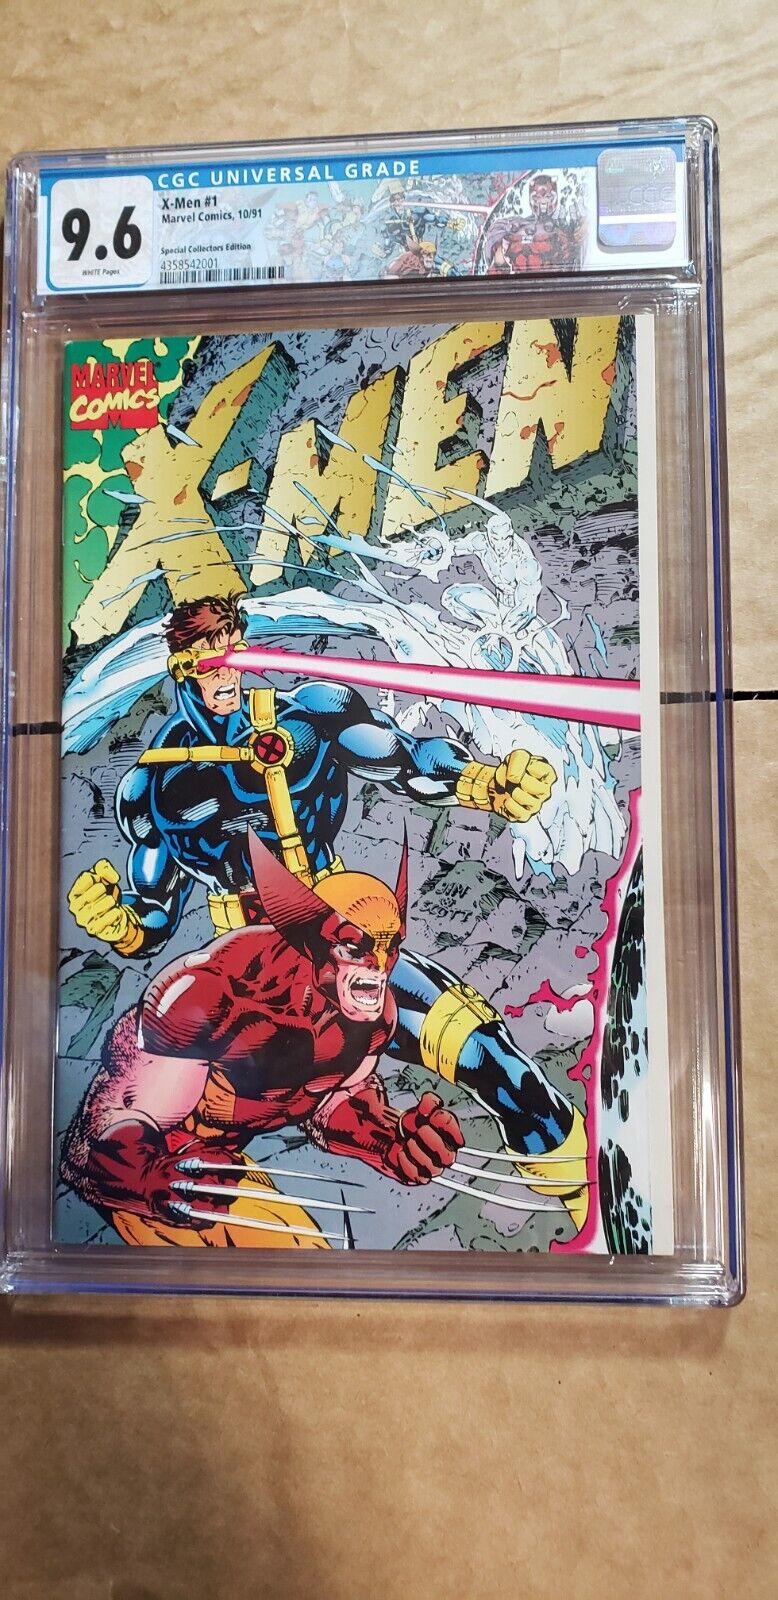 X-Men #1 CGC 9.6 Special Edition with Custom Label, Jim Lee Marvel 10/91 